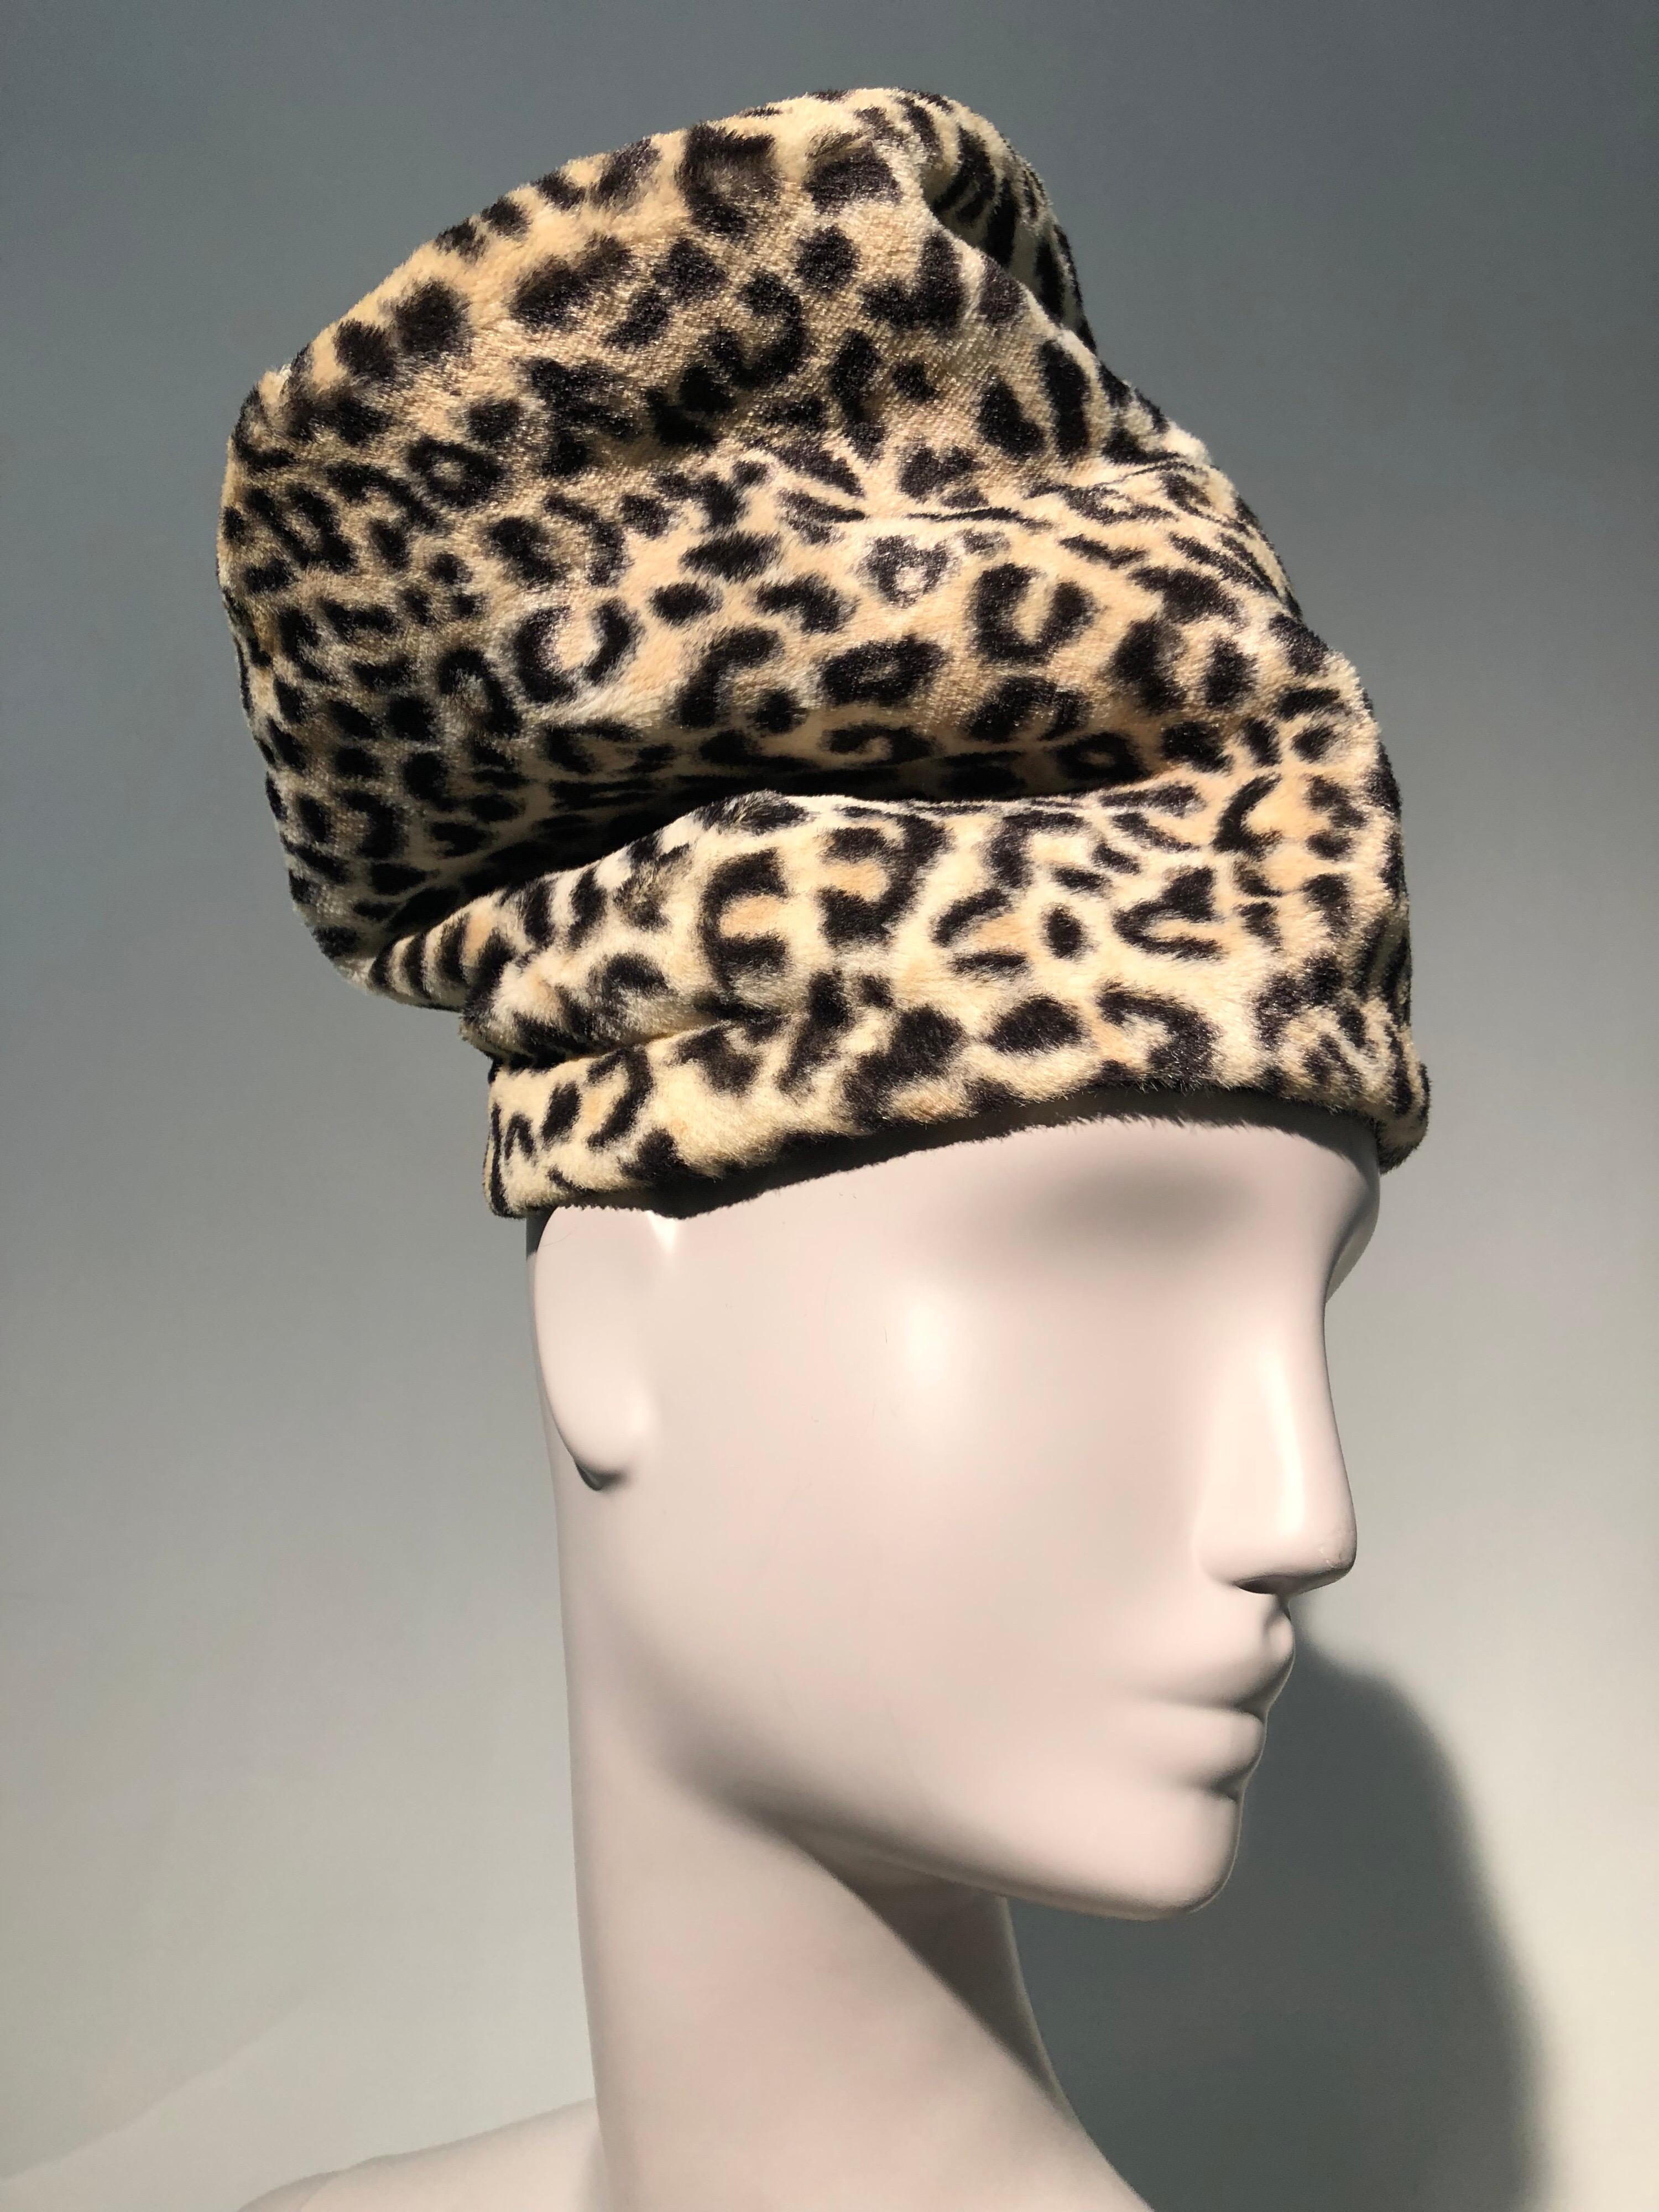 An unusual and daring 1960s Dachettes by Lilly Daché extra tall slouchy faux leopard hat in a stovepipe shape. No brim. The talk of the party!